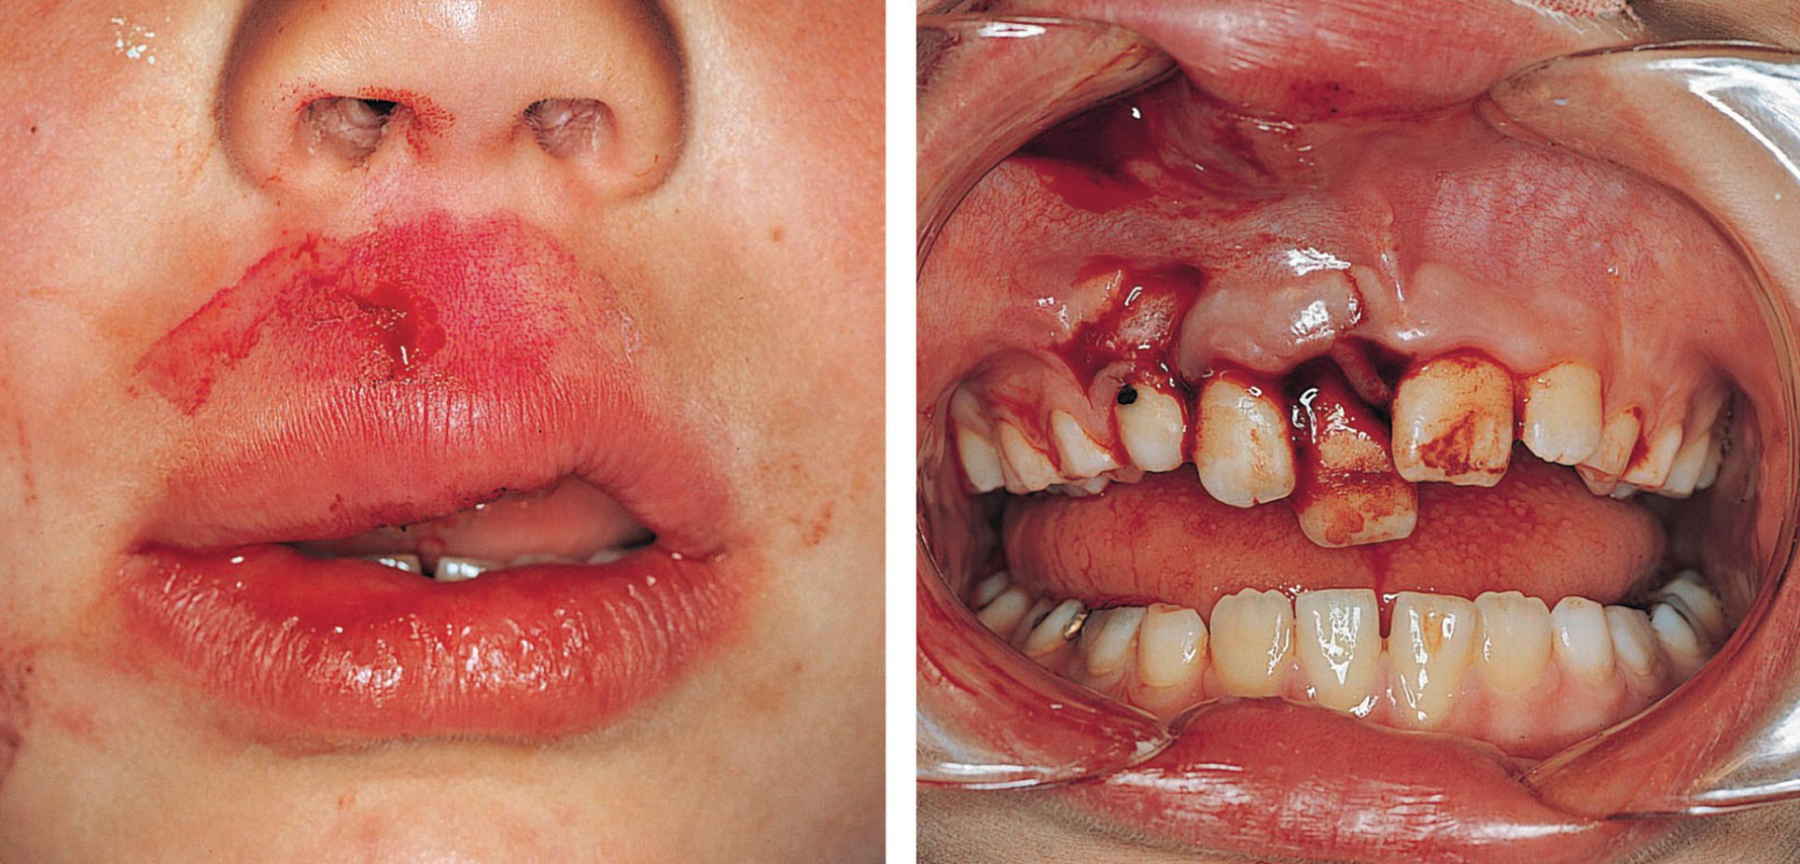 2 Photos of lip laceration and abrasion (left) and displacement of the right central and lateral incisors of a patient (right).